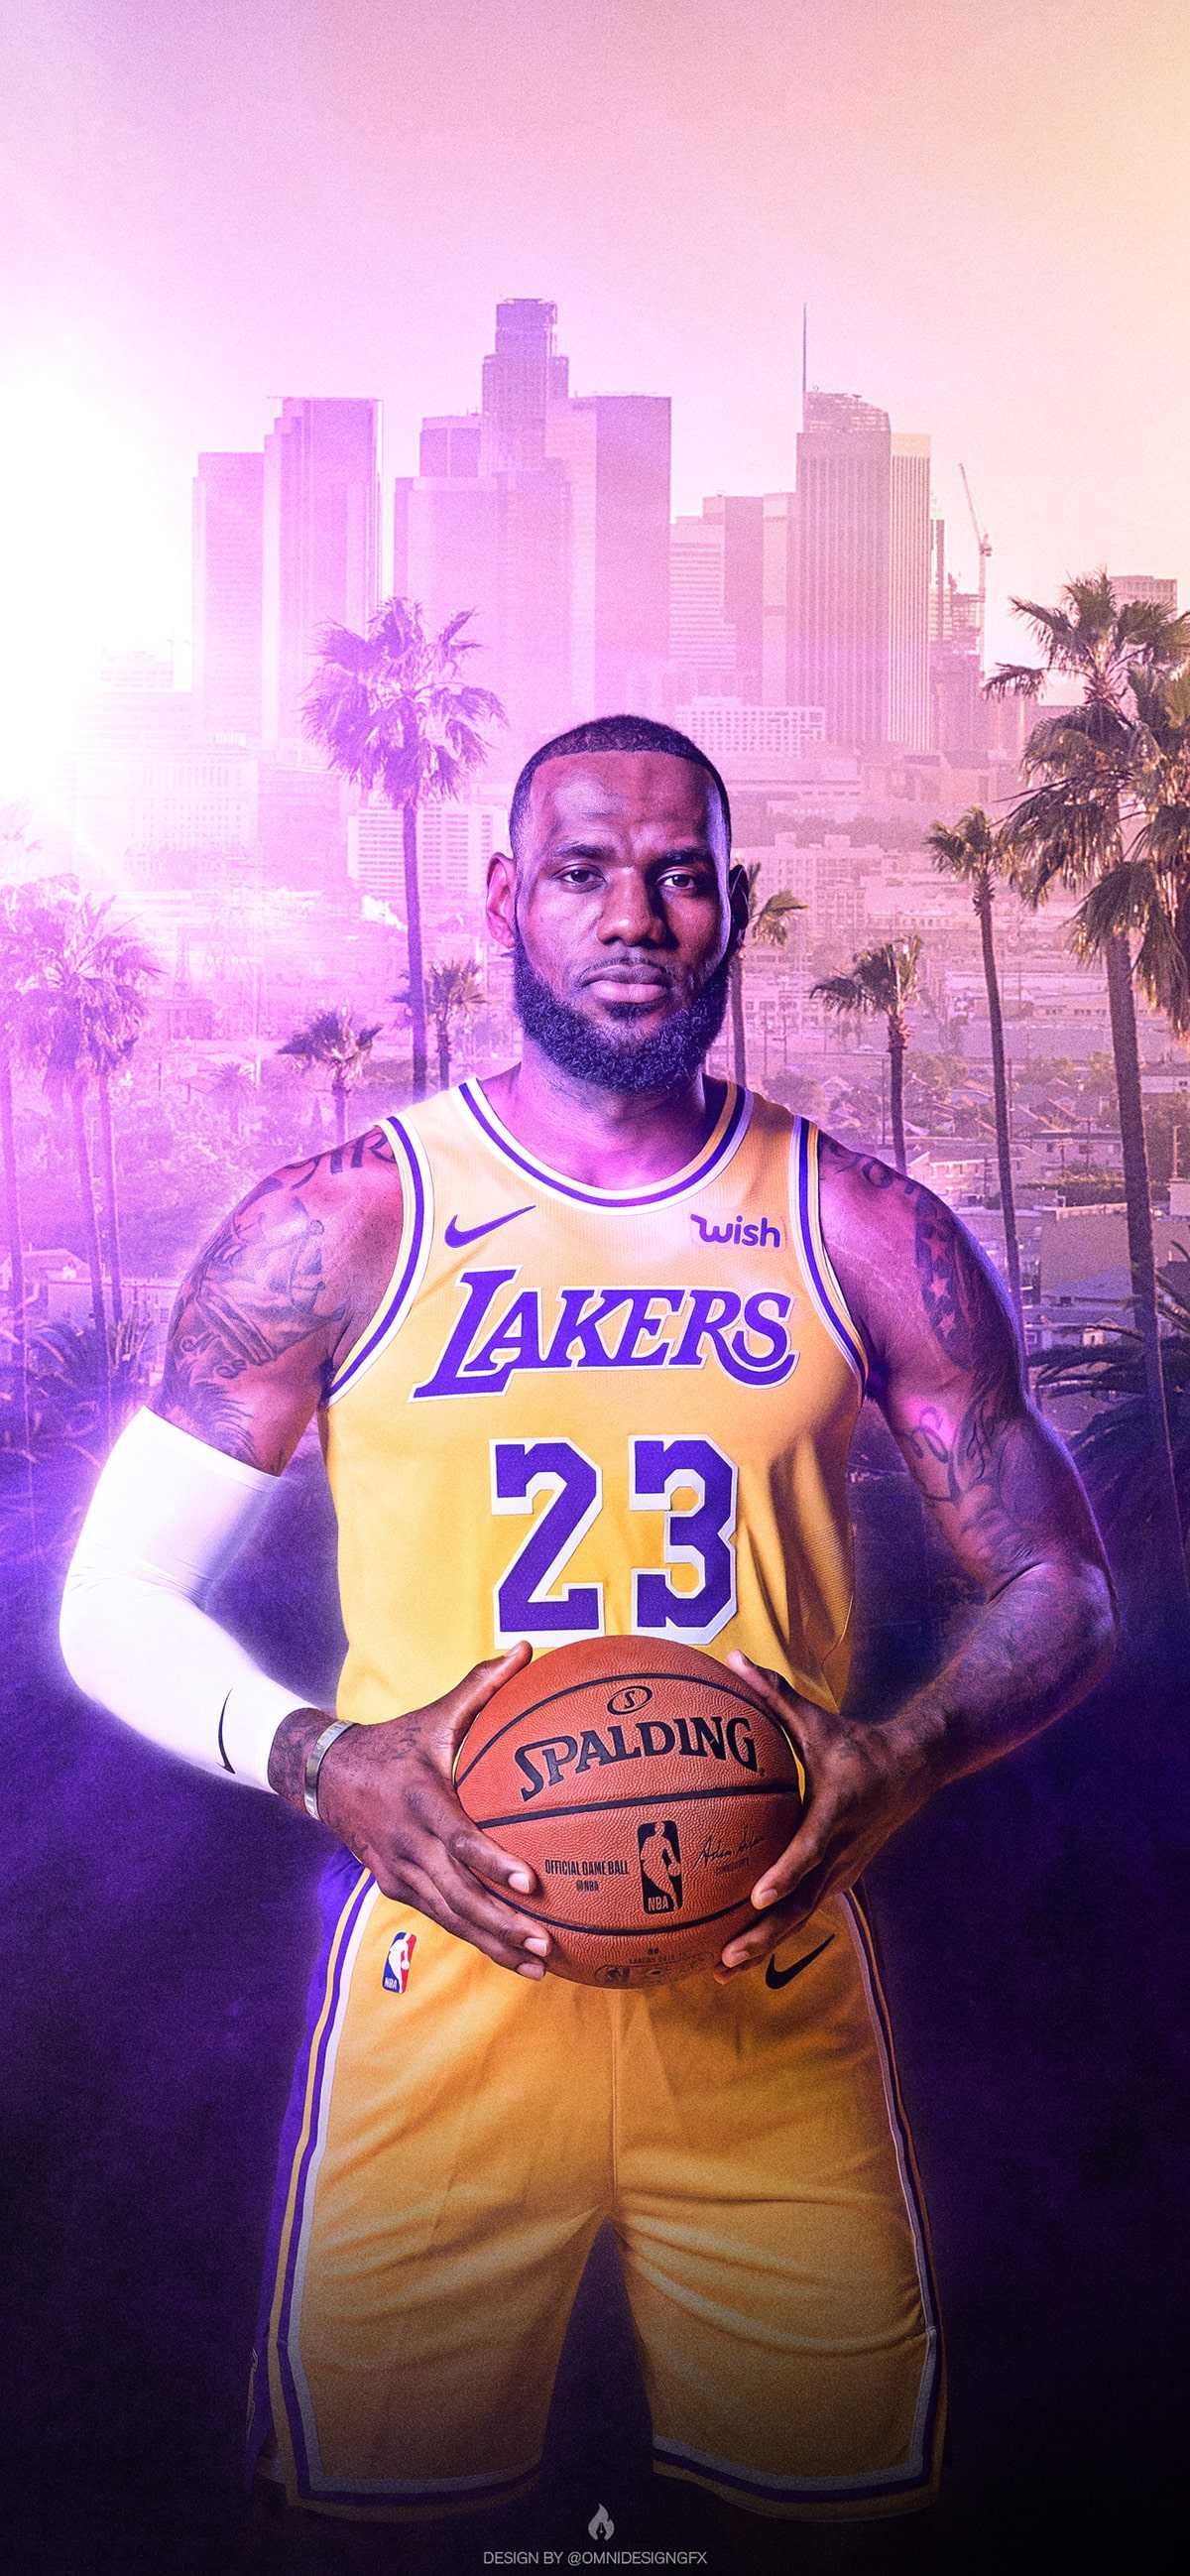 LeBron James Wallpaper Discover more Android, animated, dunk, iphone Lakers wallpaper.. Lebron james, Lebron james wallpaper, Lebron james background